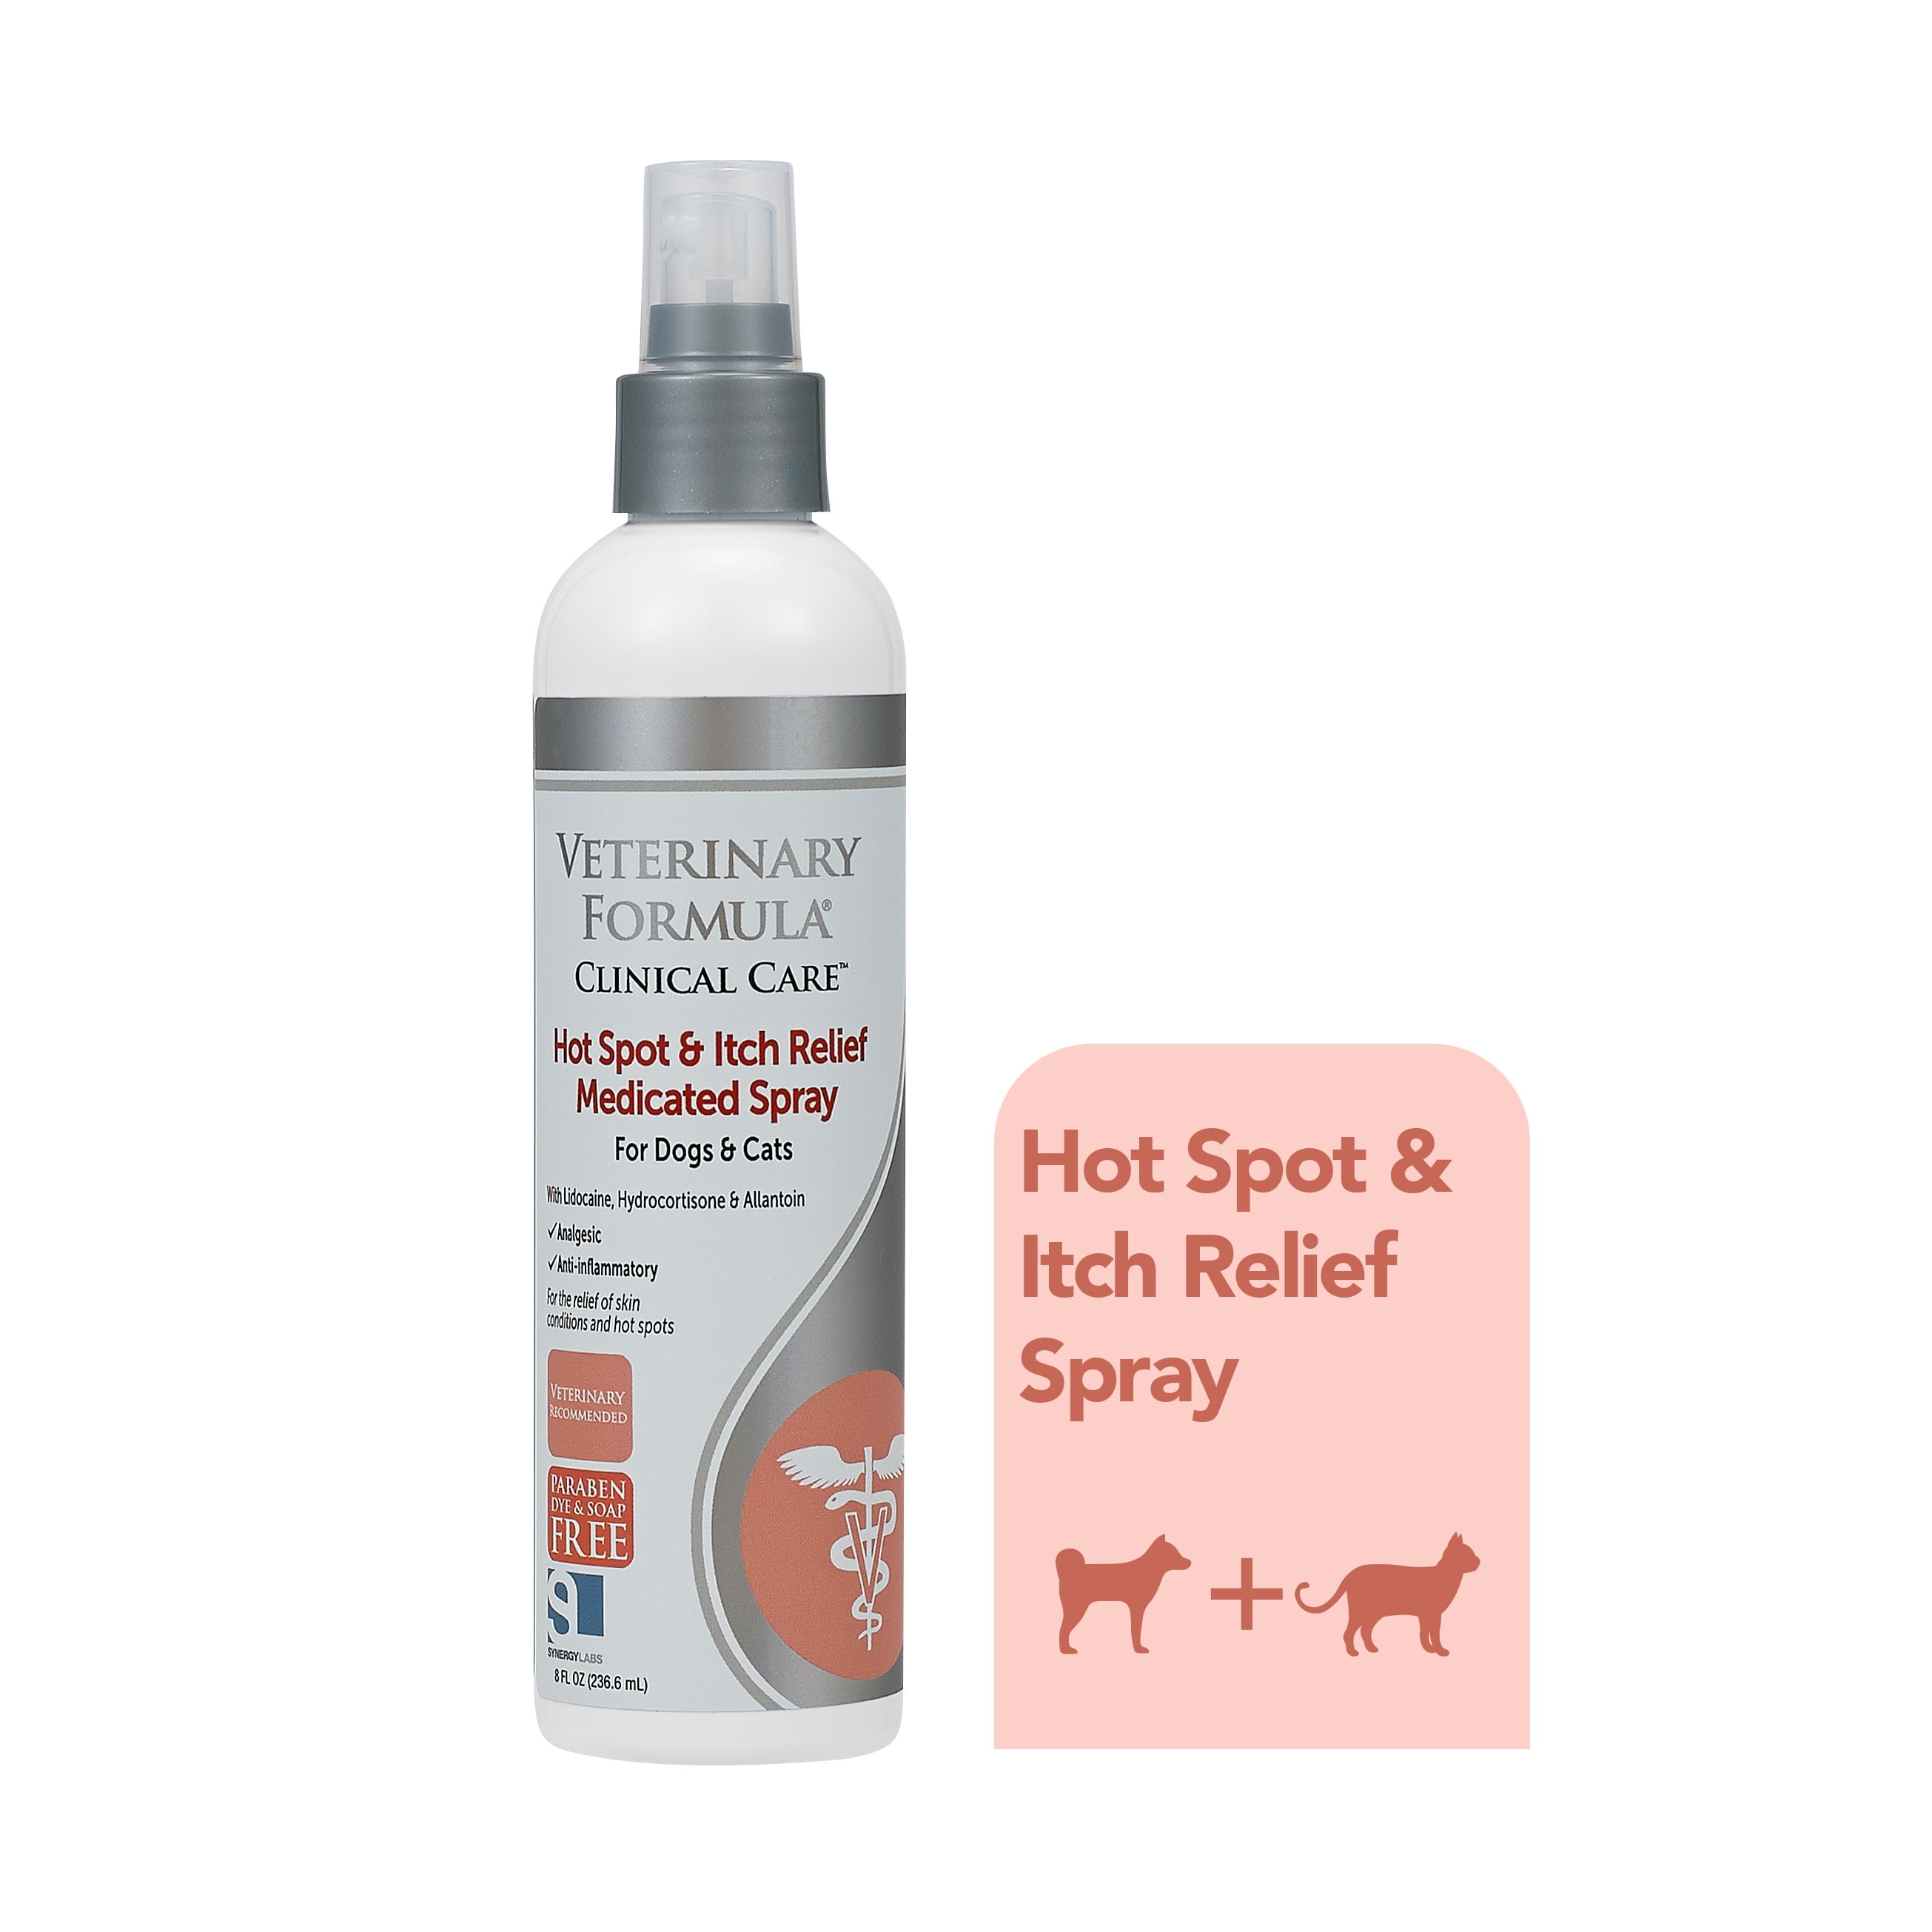 Veterinary Formula Clinical Care Hot Spot and Itch Relief Medicated